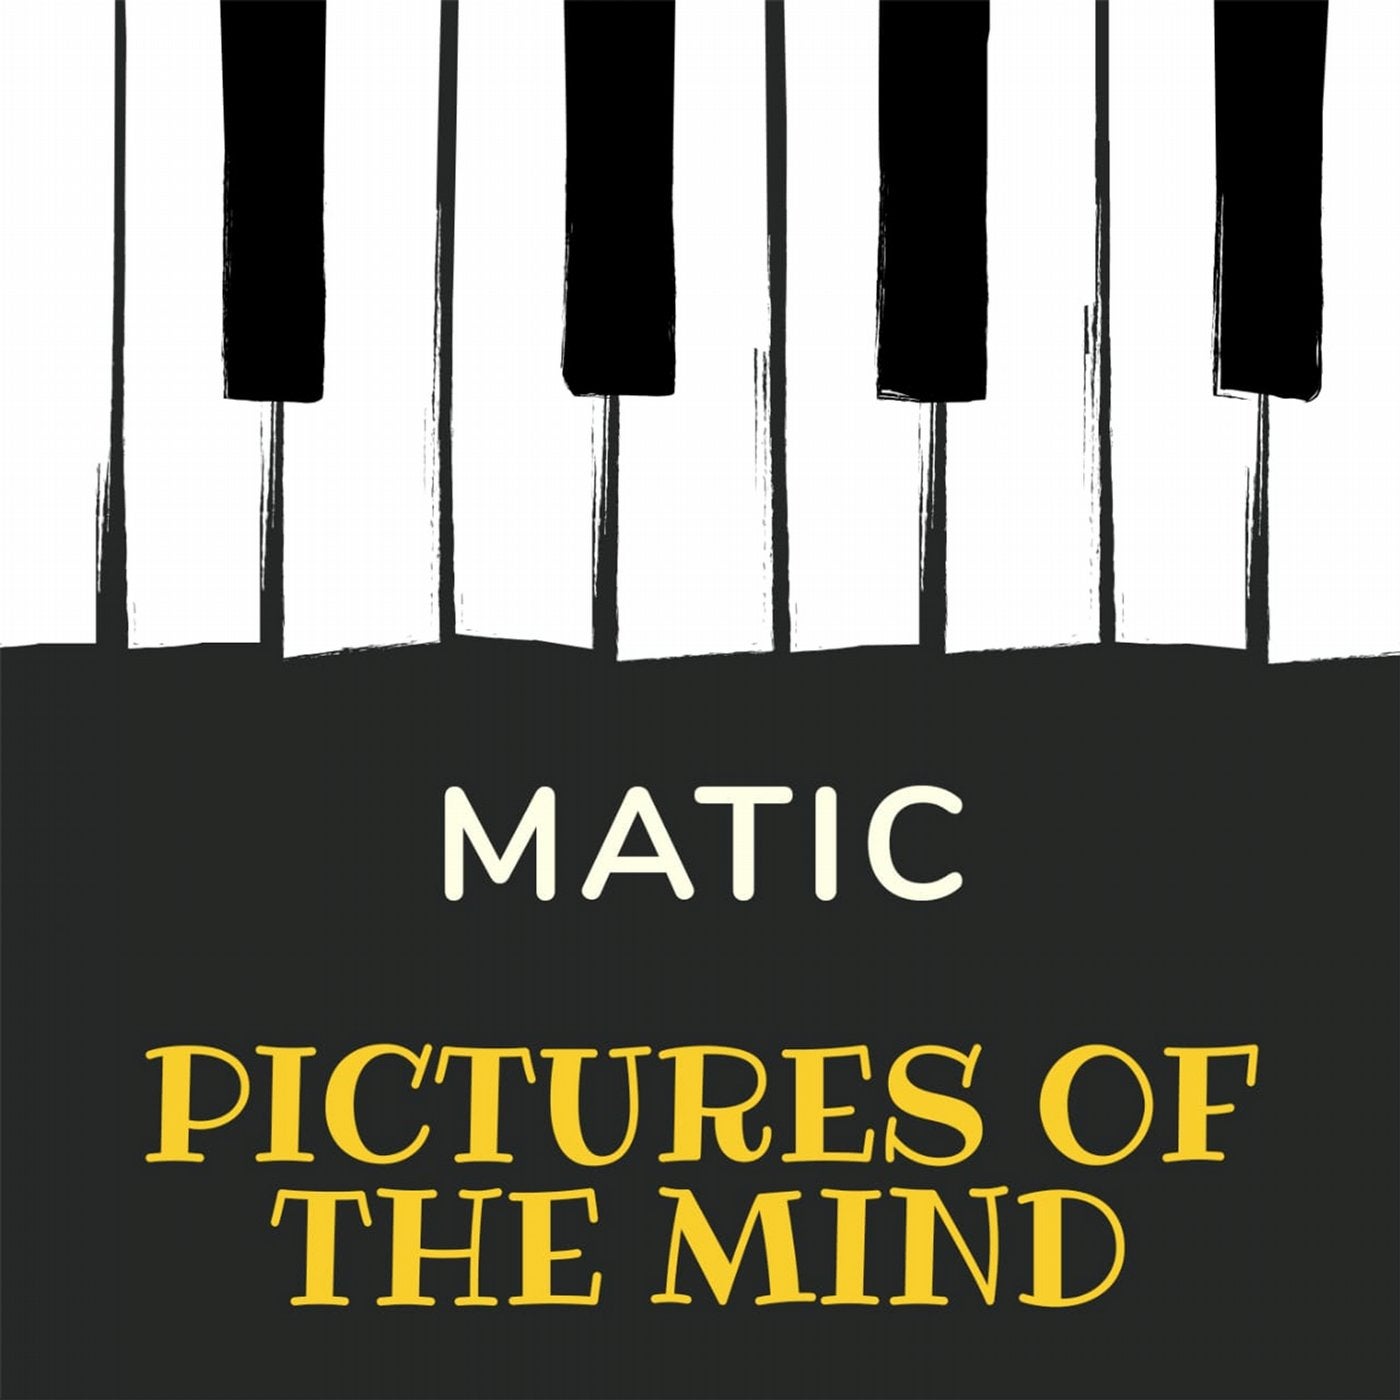 Pictures of the Mind